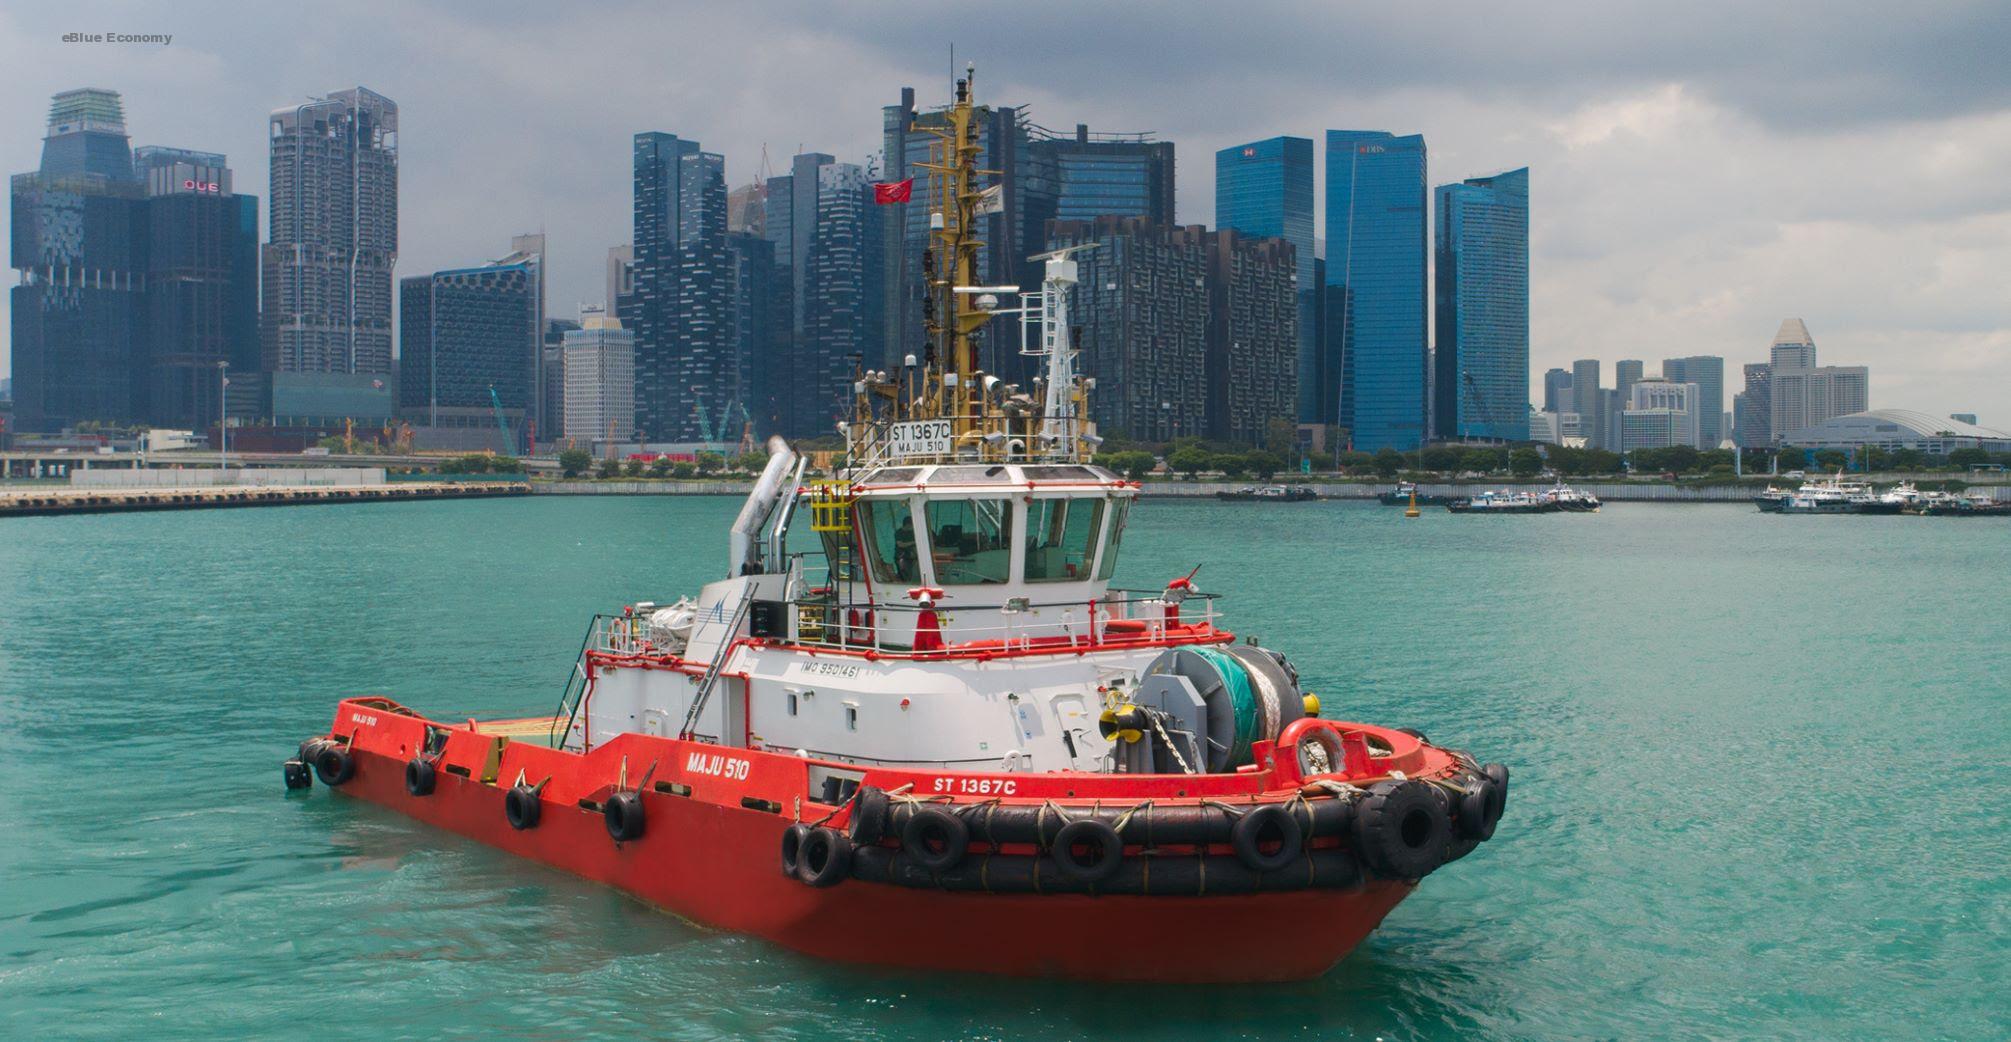 eBlue_economy_Harbor Tug Developed by Keppel O&M the First to Receive